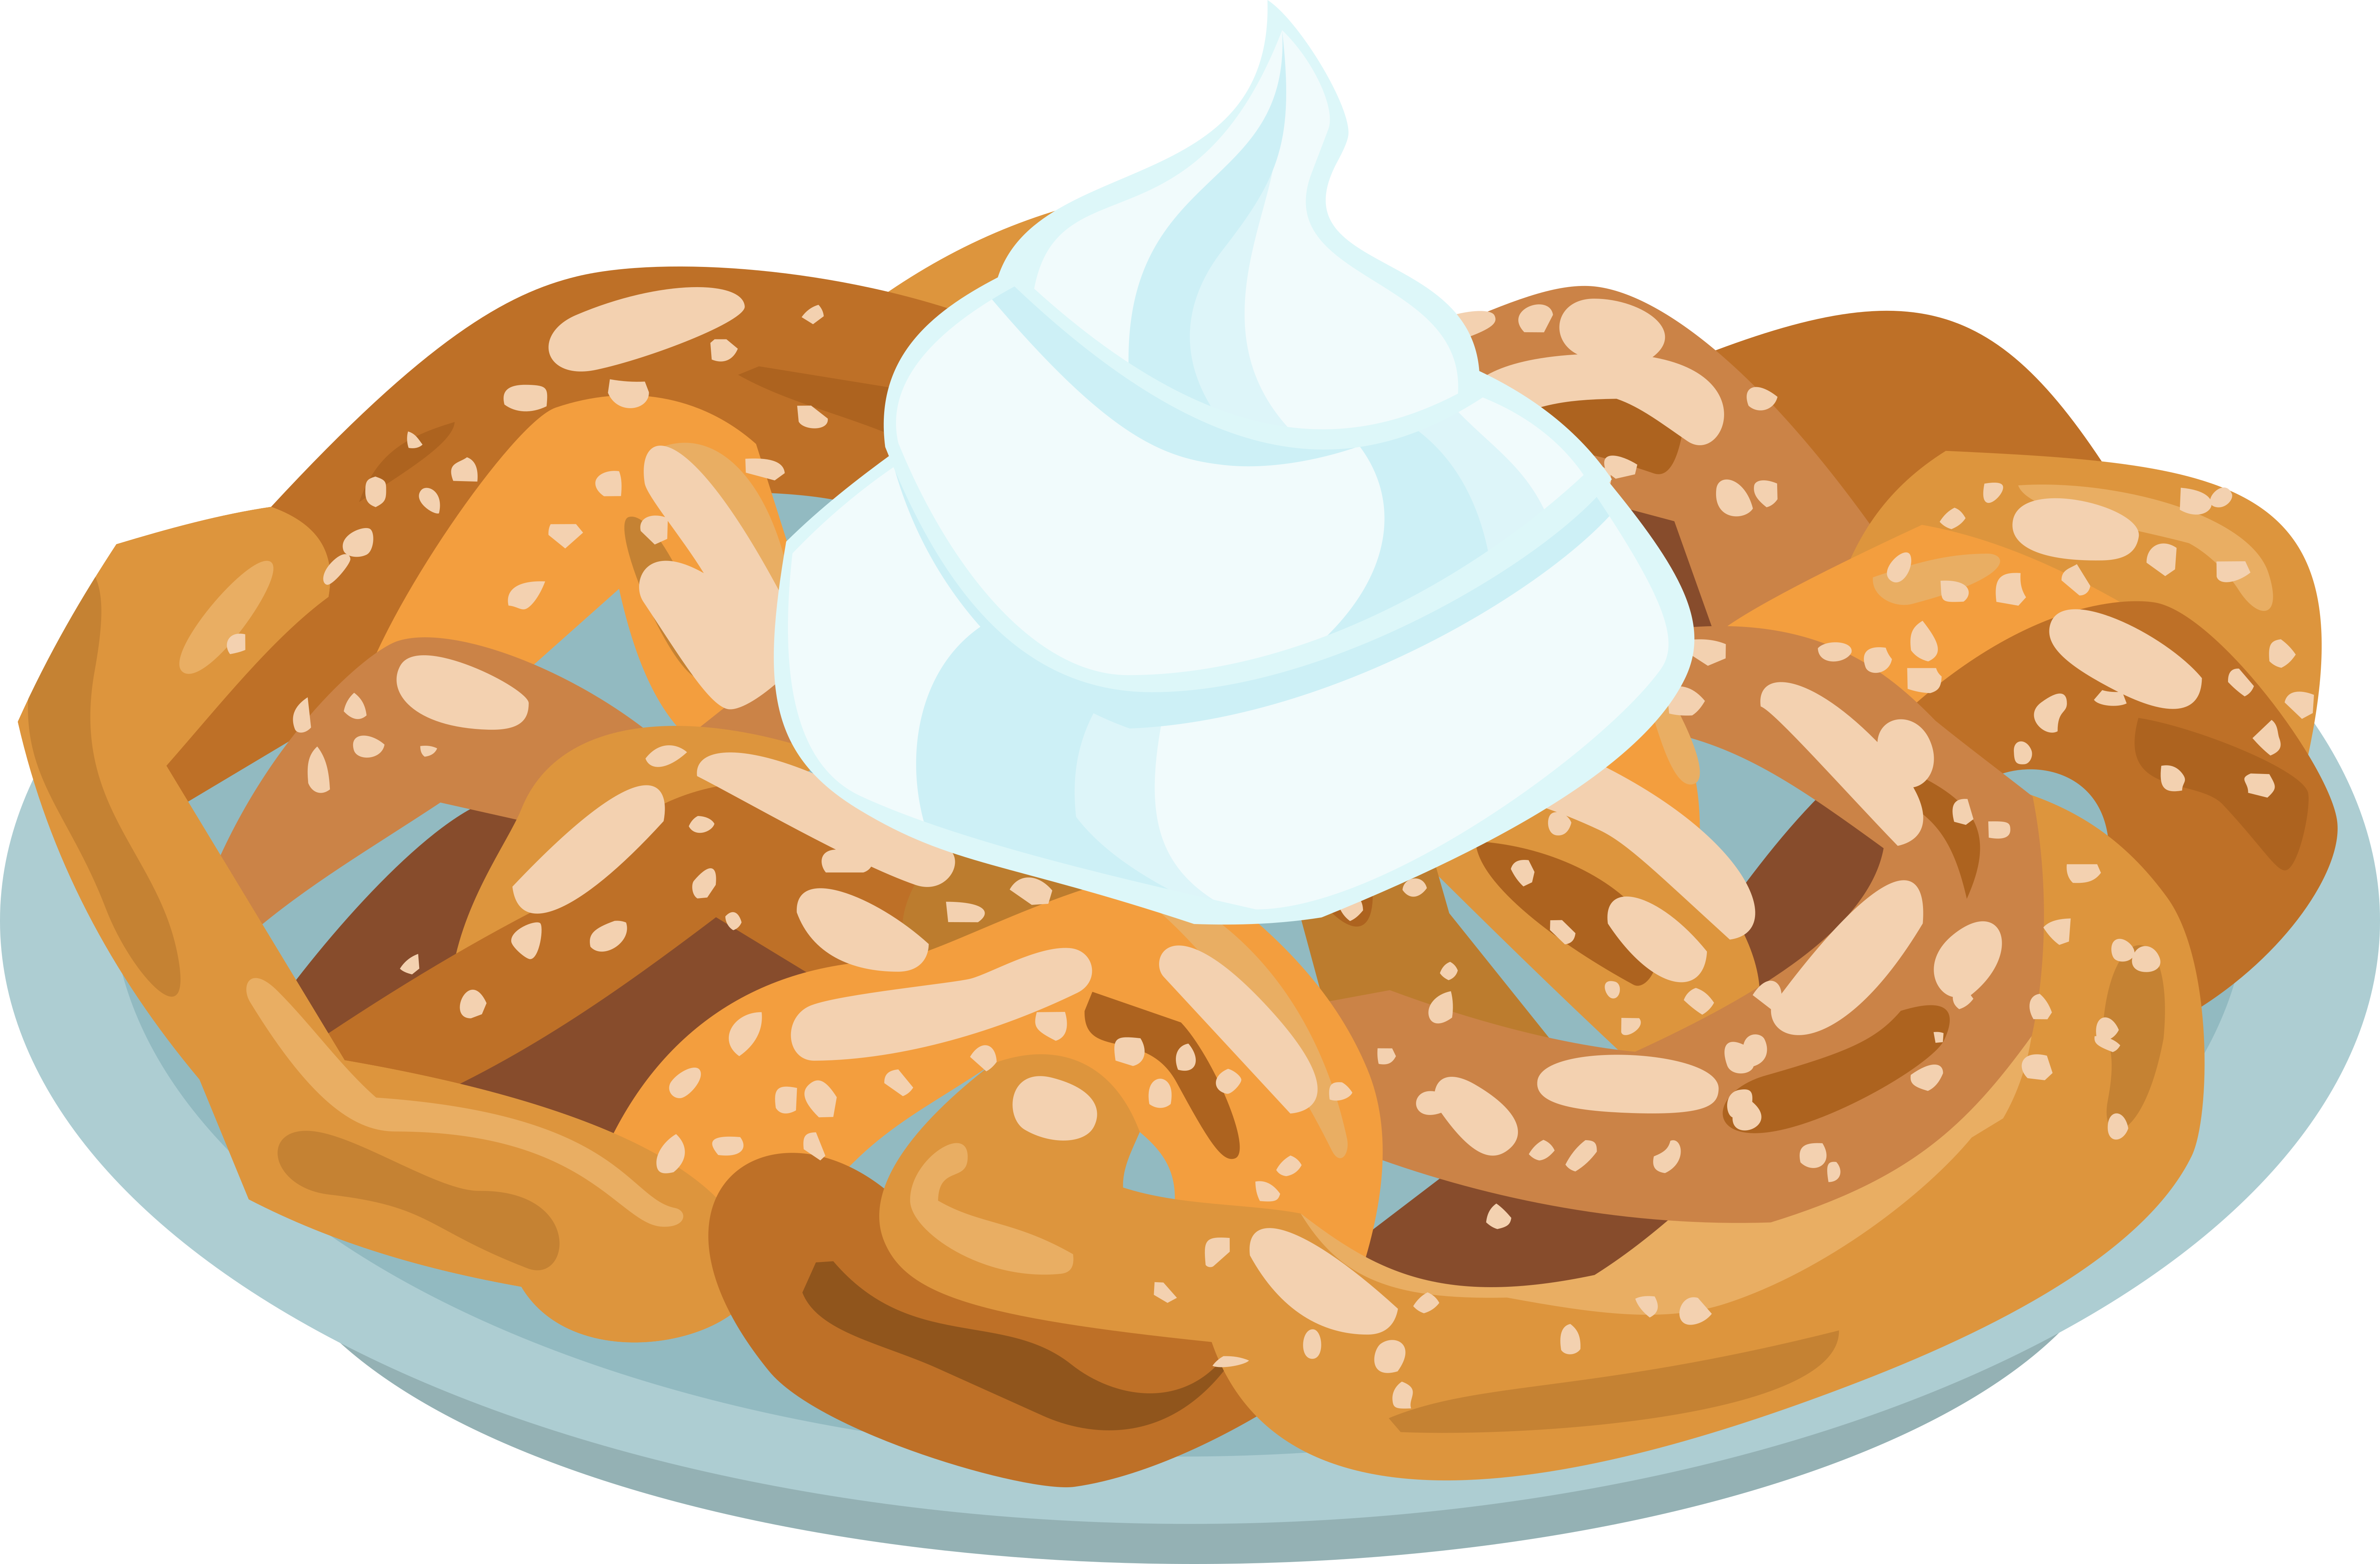 Funnel Cake clipart image can be... 